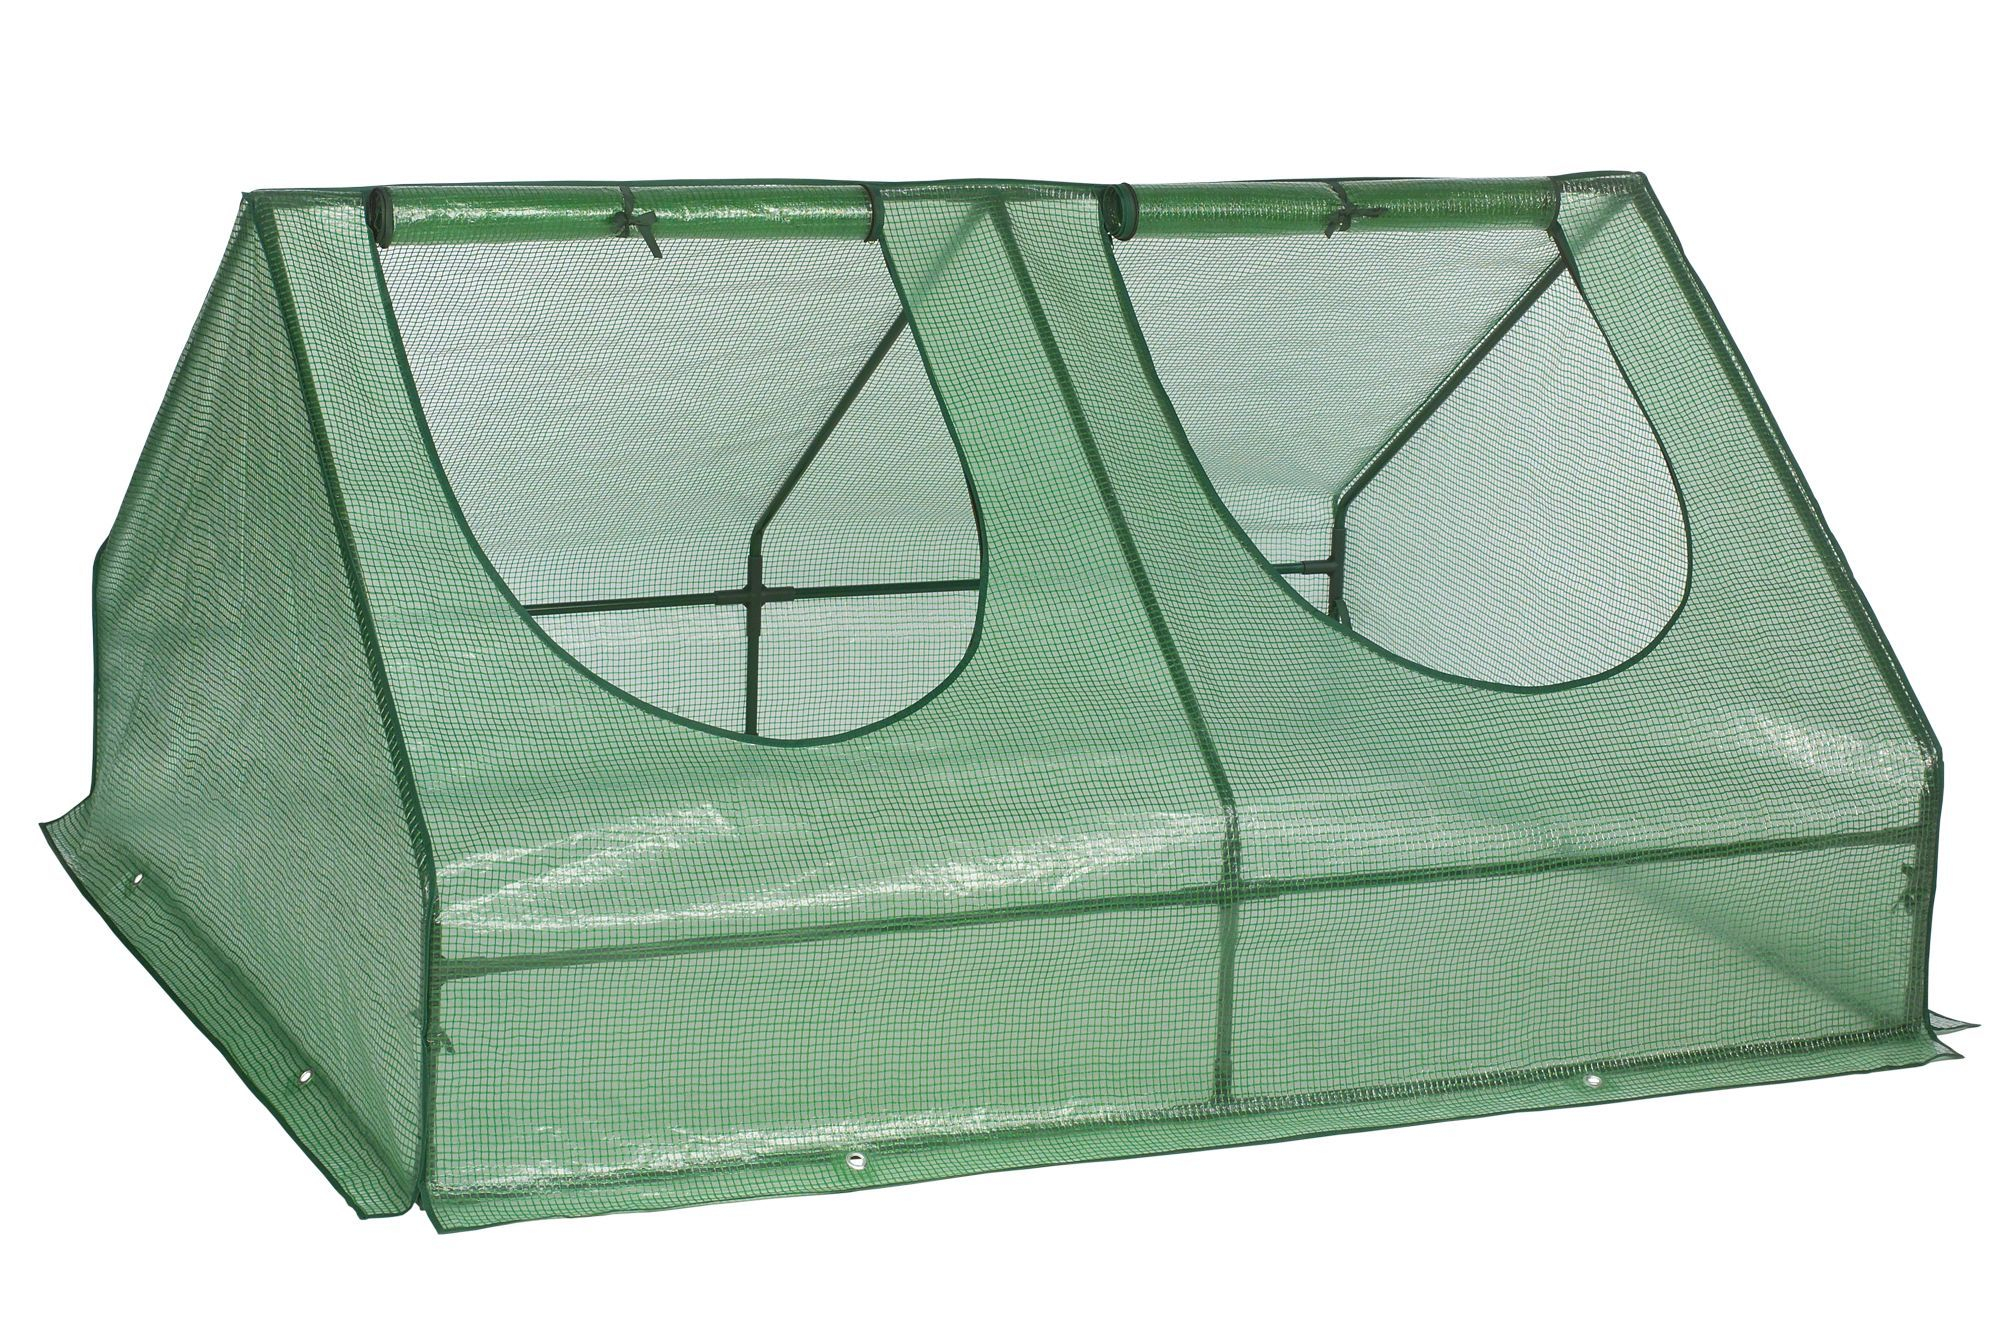 Bq Giant Cloche Cold Frame Departments Diy At Bq pertaining to dimensions 2000 X 1341